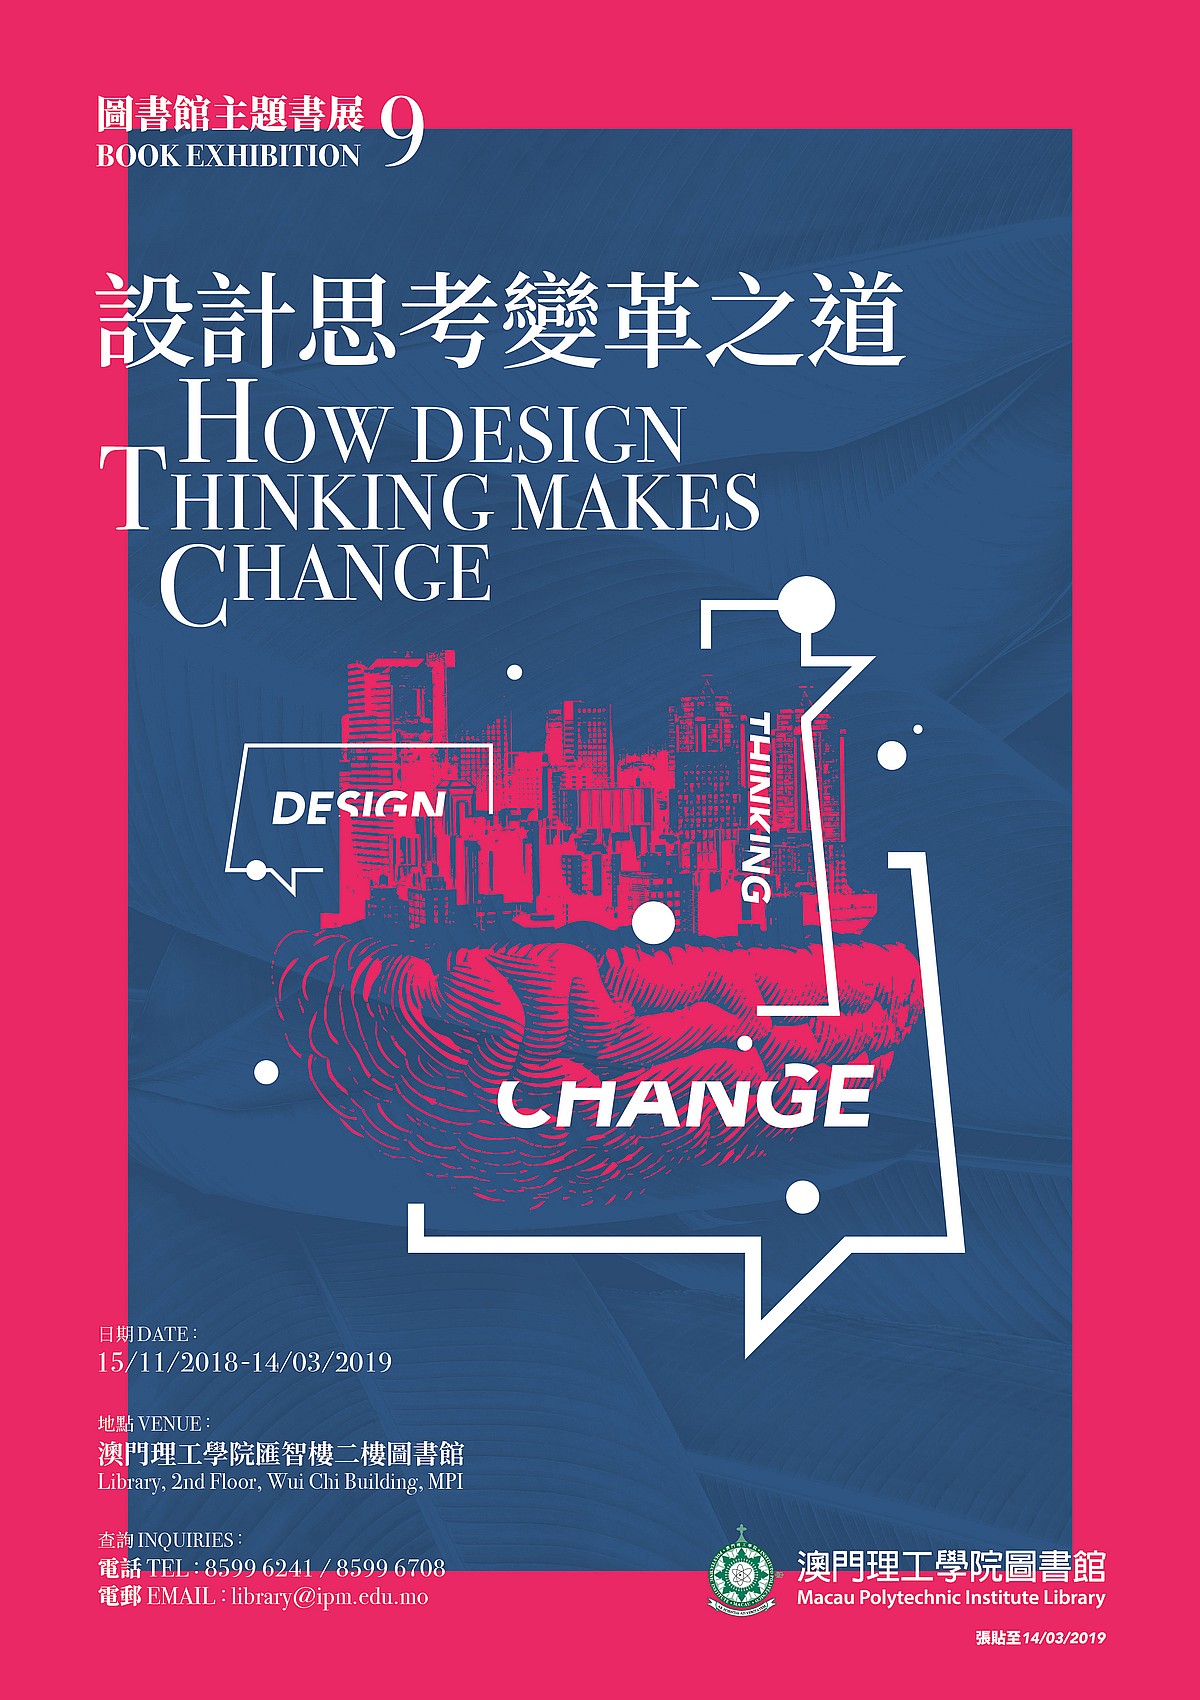 LIBRARY BOOK EXHIBITION 9 - How Design Thinking Makes Change